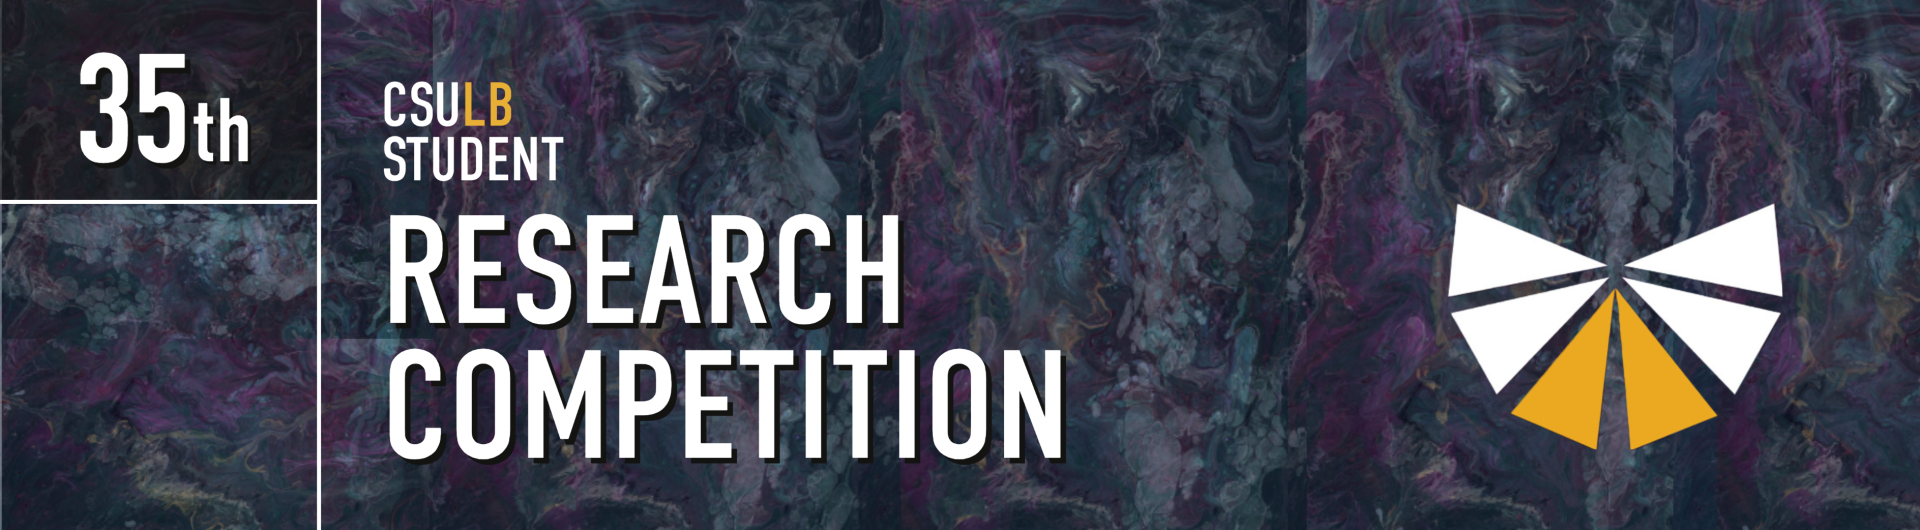 35th Student Research Competition banner